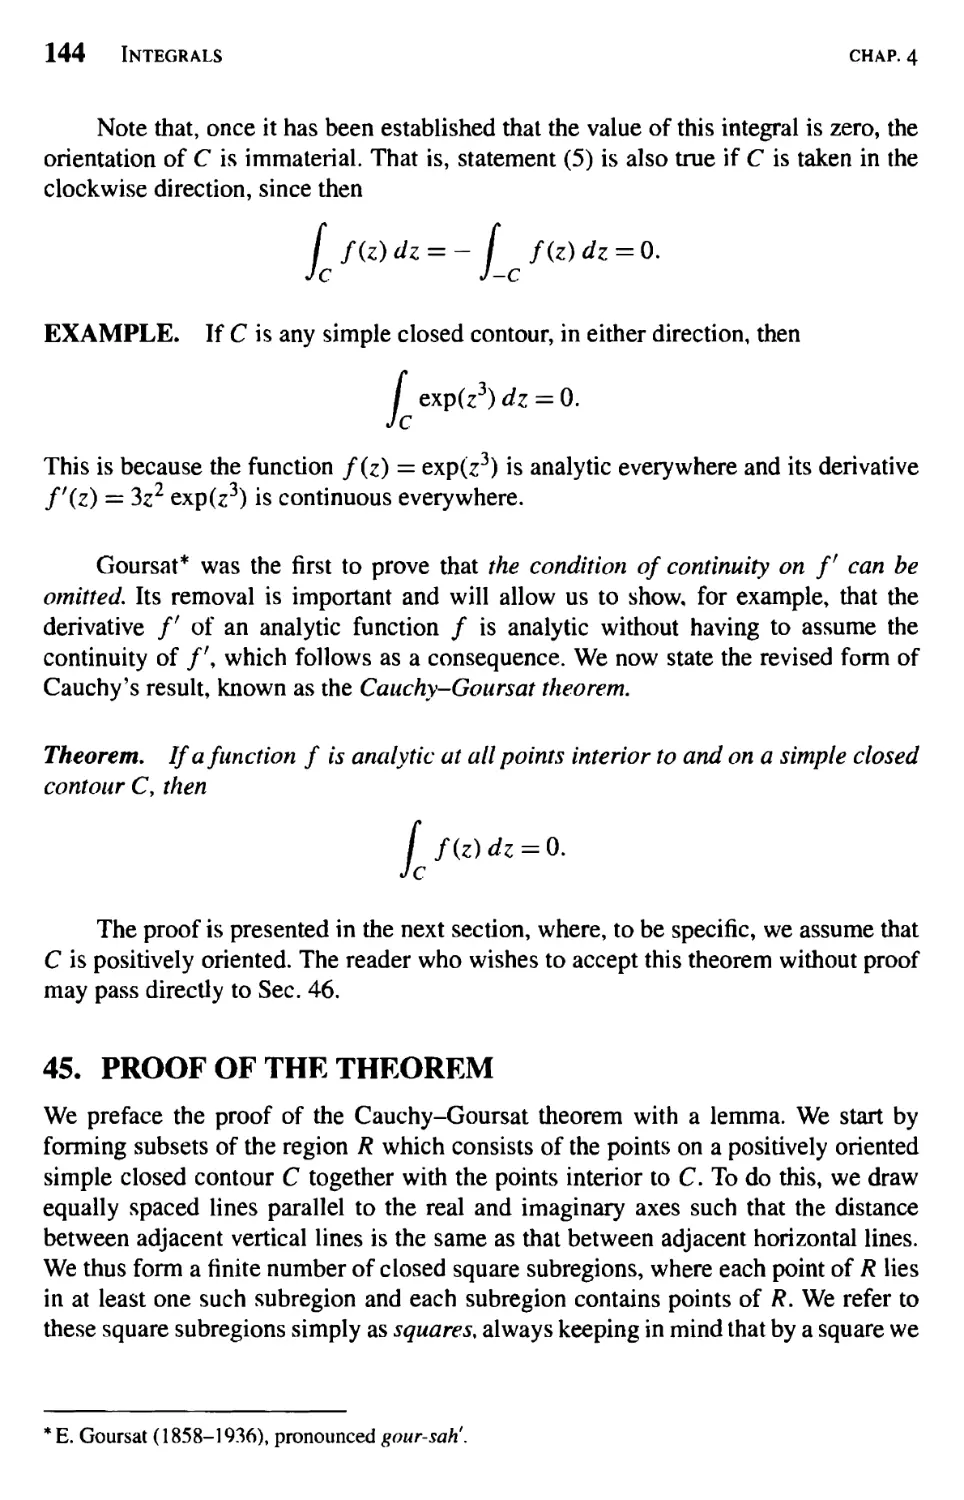 Proof of the Theorem